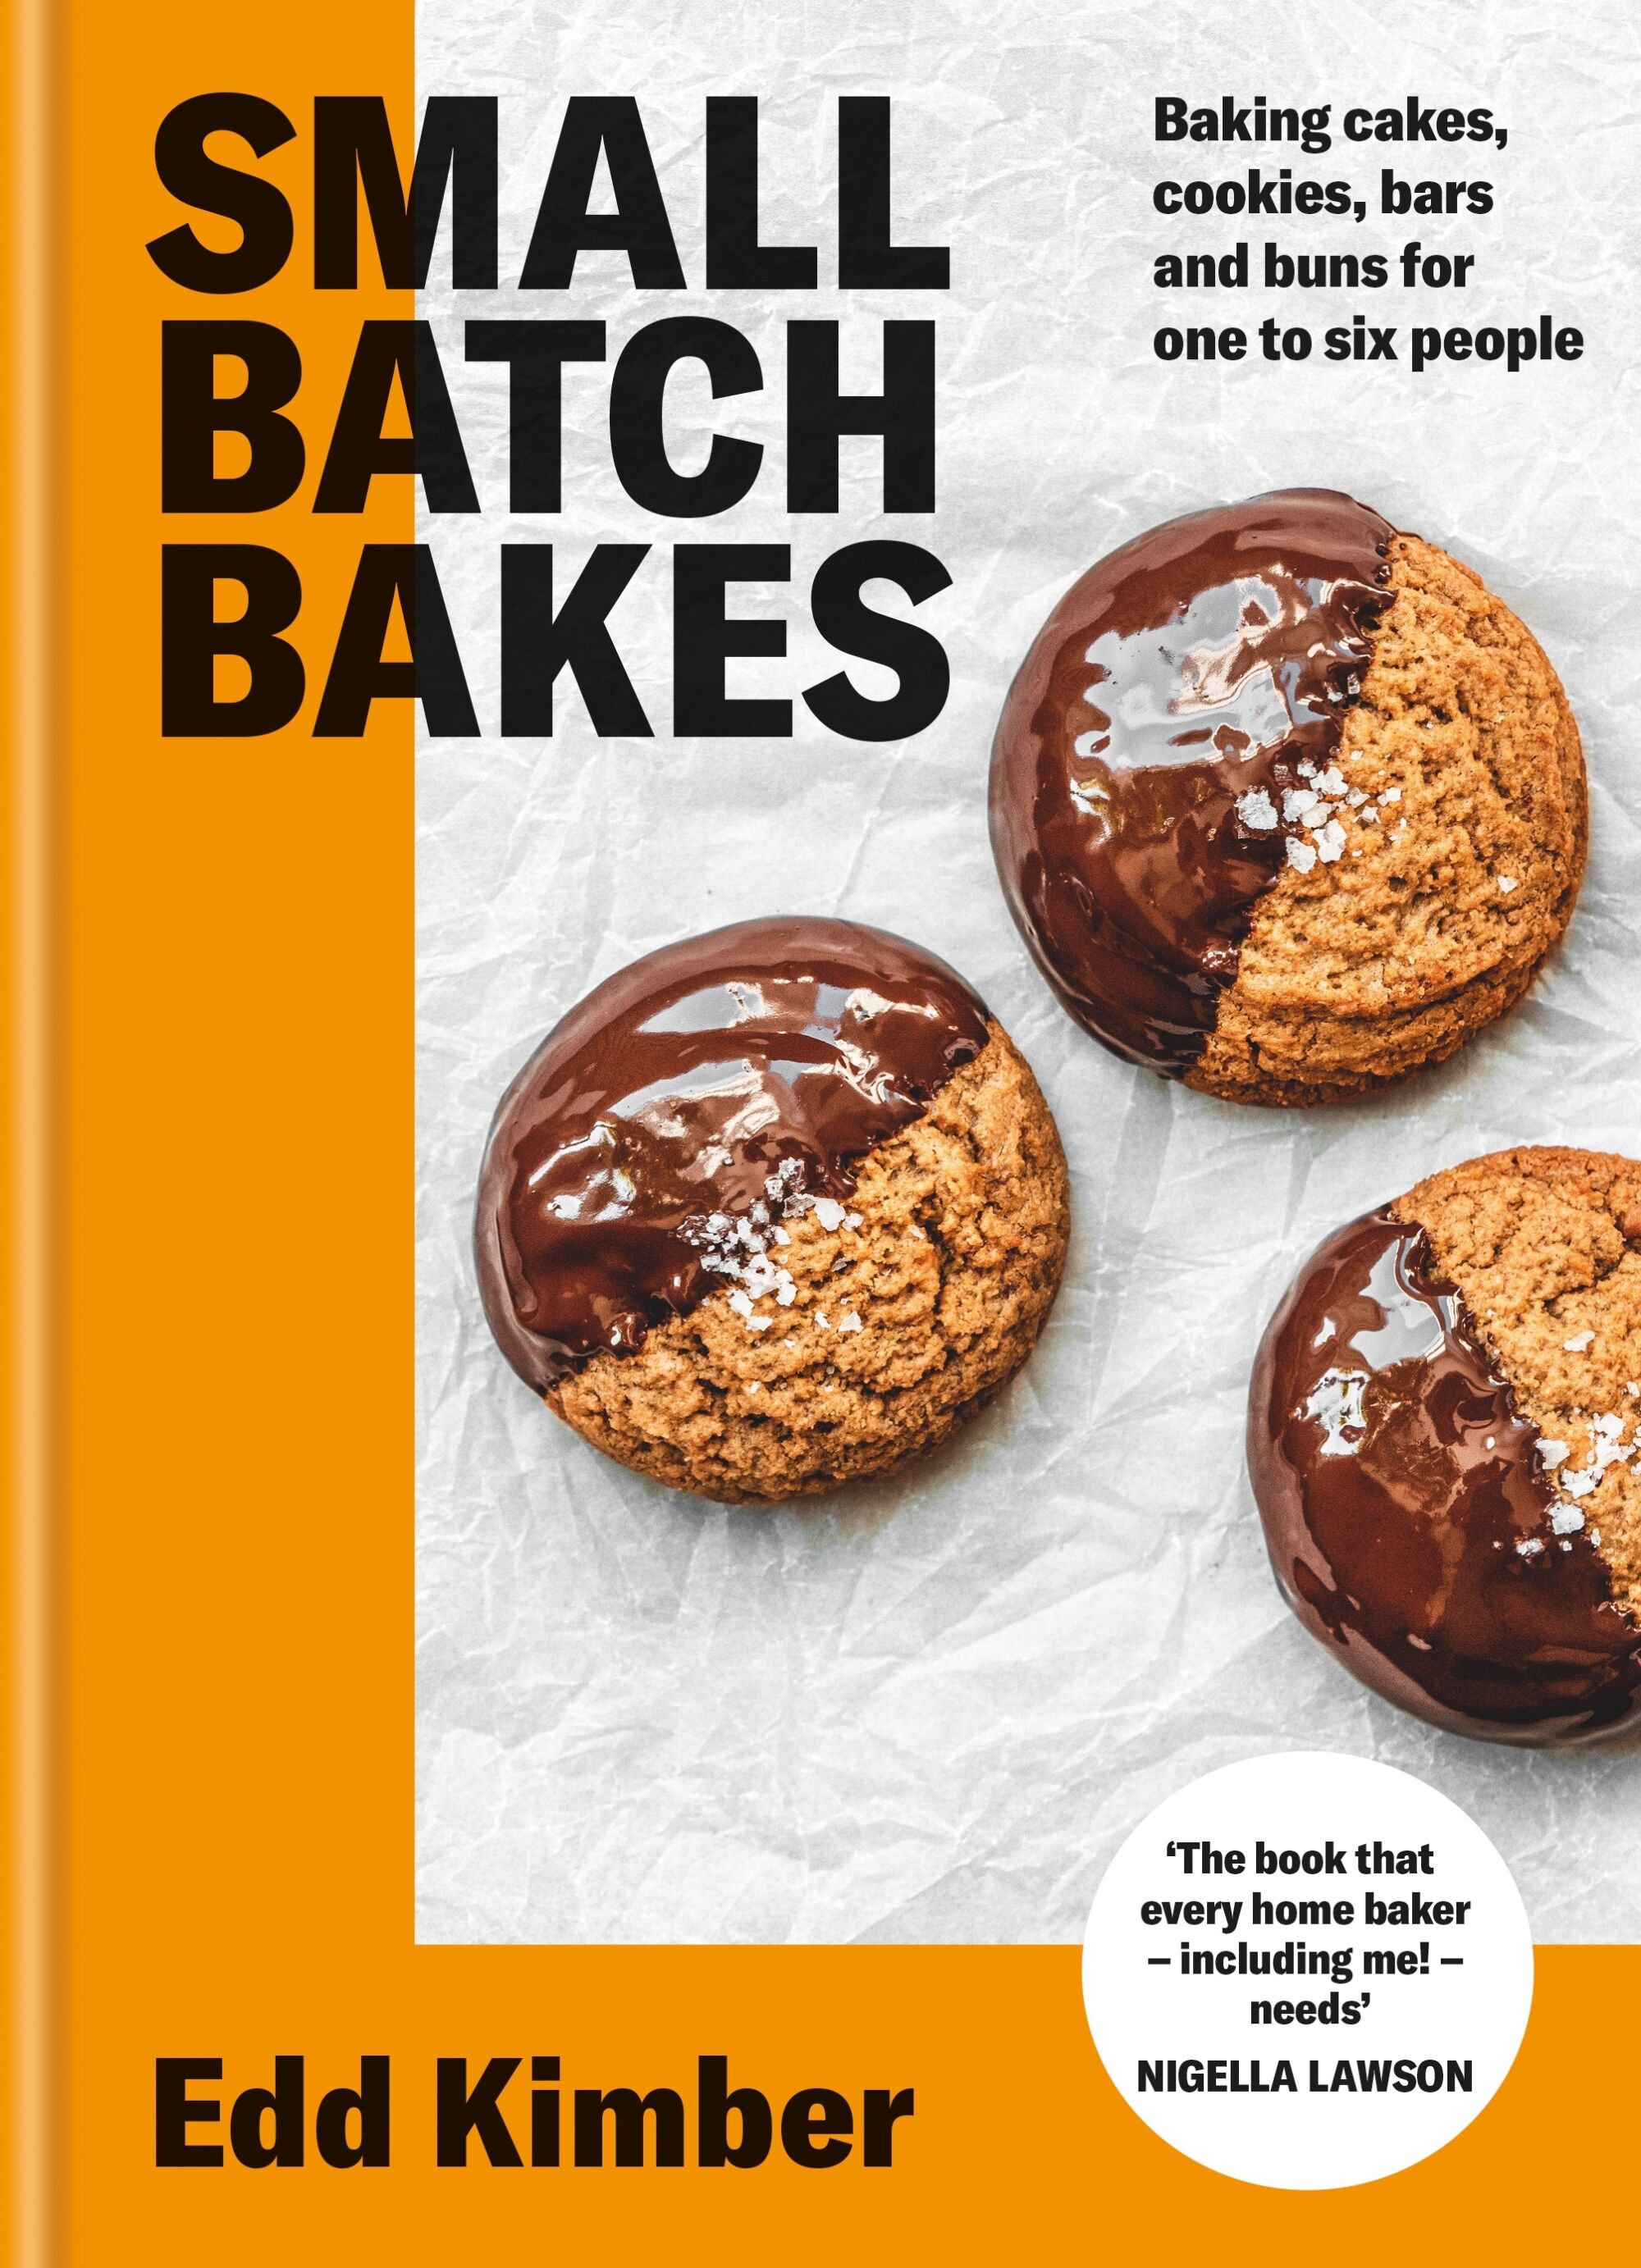 Small Batch Bakes: Baking cakes, cookies, bars and buns for one to six people by Edd Kimber